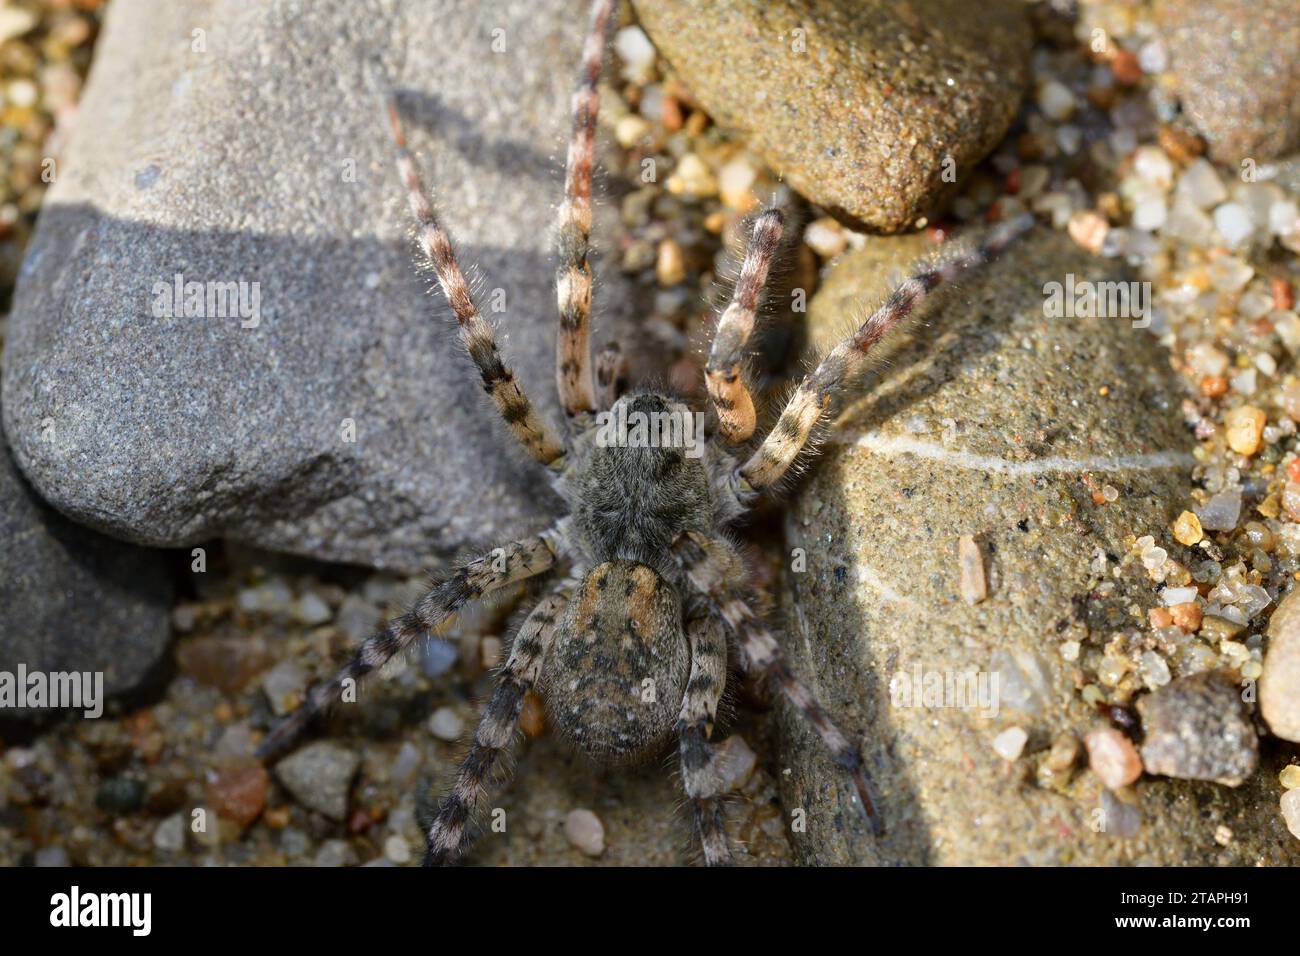 Spider lycosa hunting on the stone near the river Stock Photo